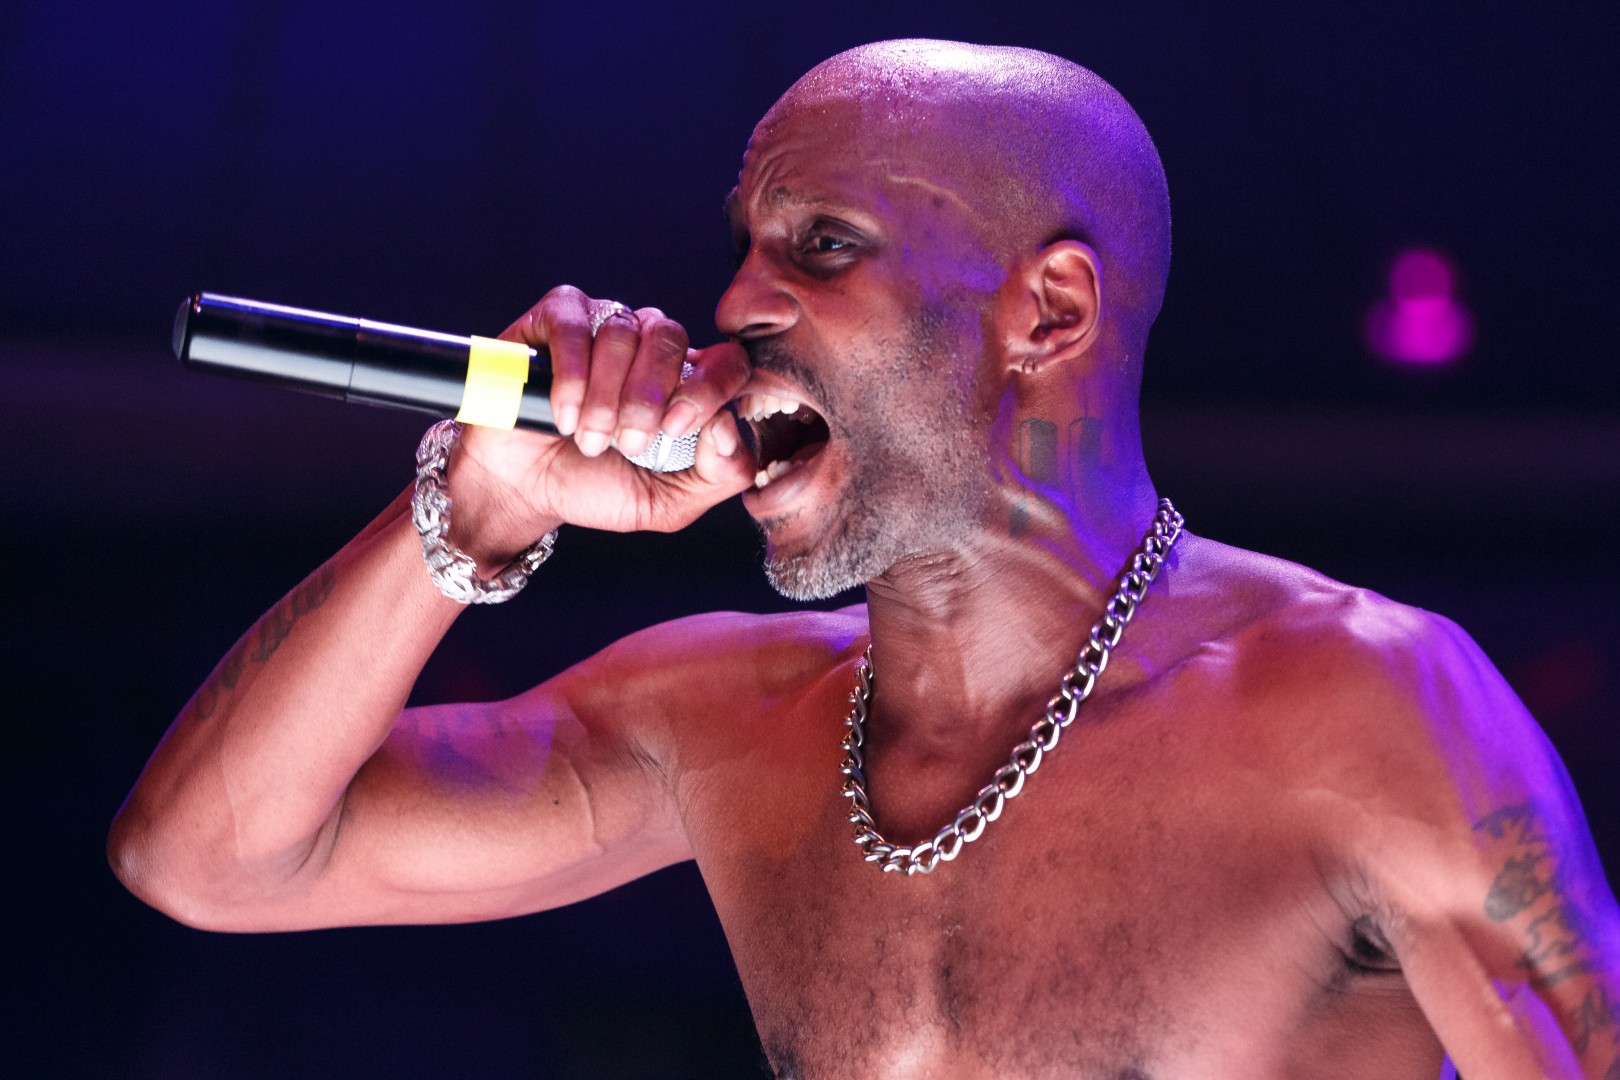 DMX at One Club in Bucharest on March 28, 2015 (a63ce94f02)